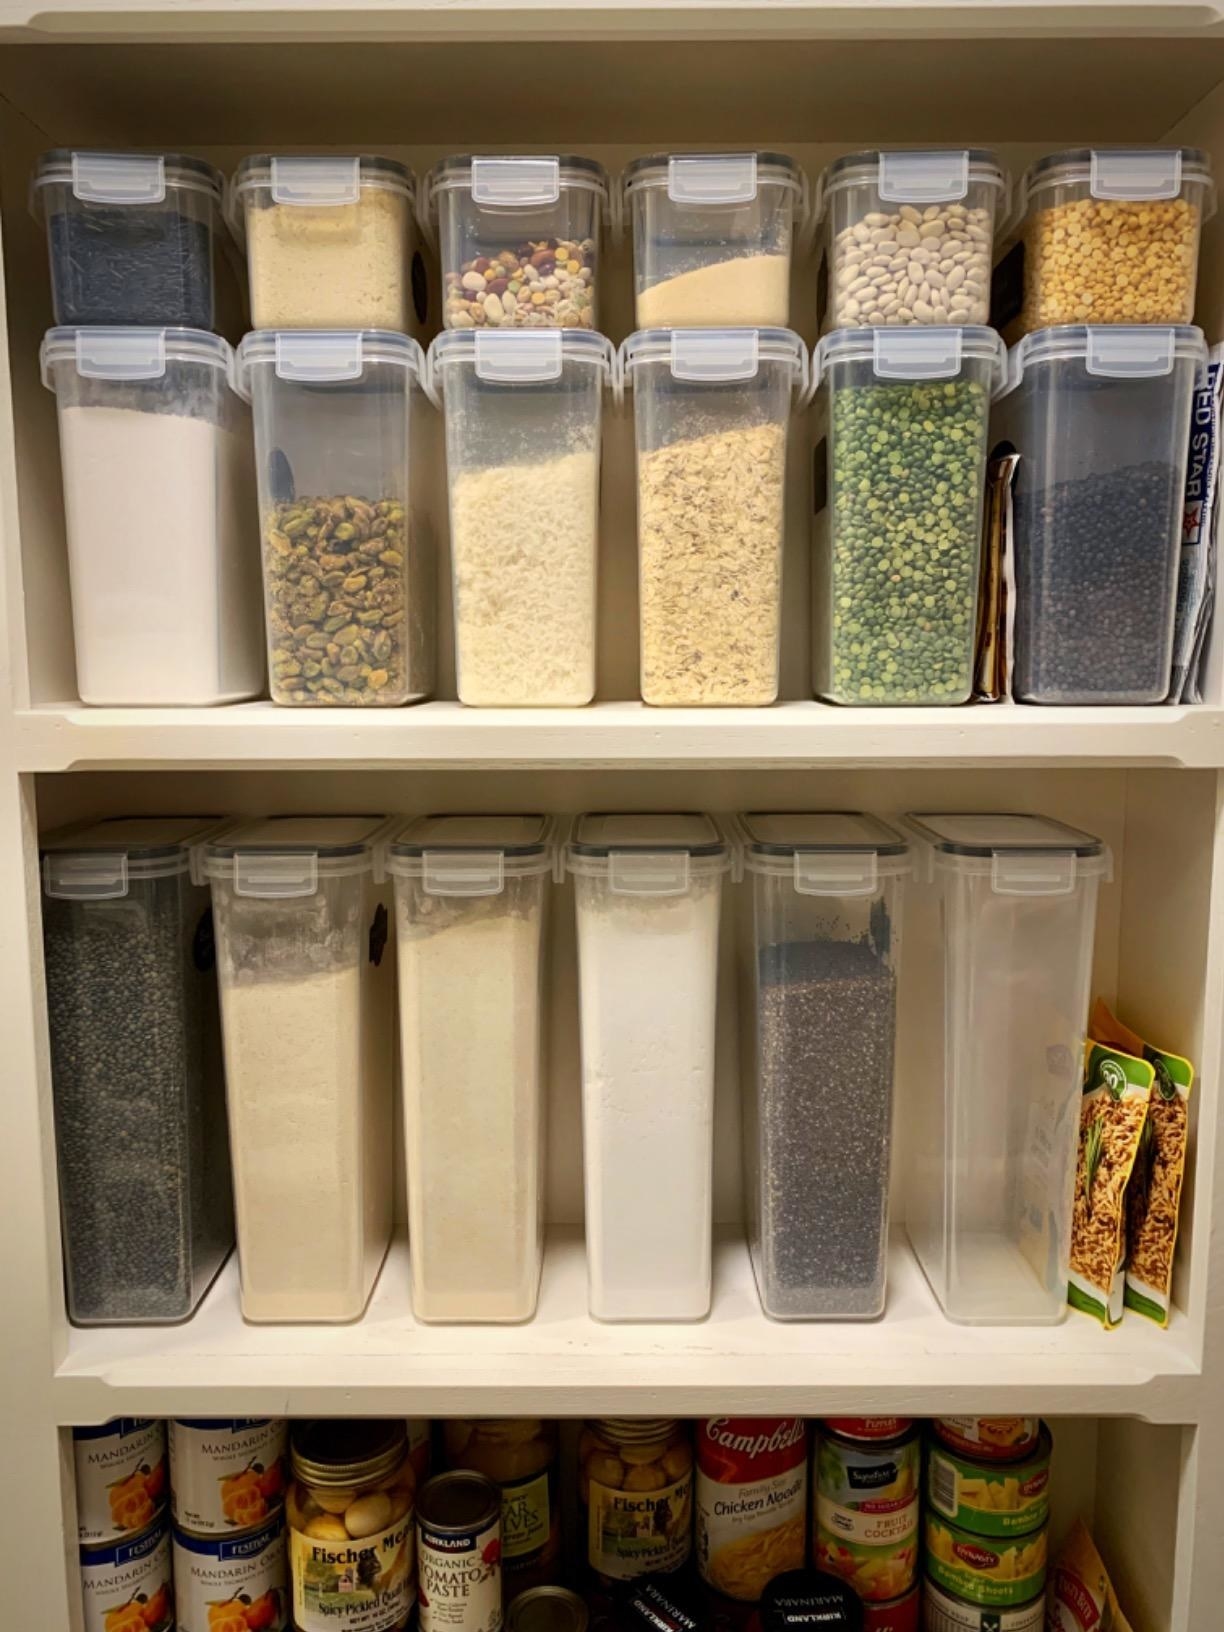 The containers filled with bulk goods, in a pantry